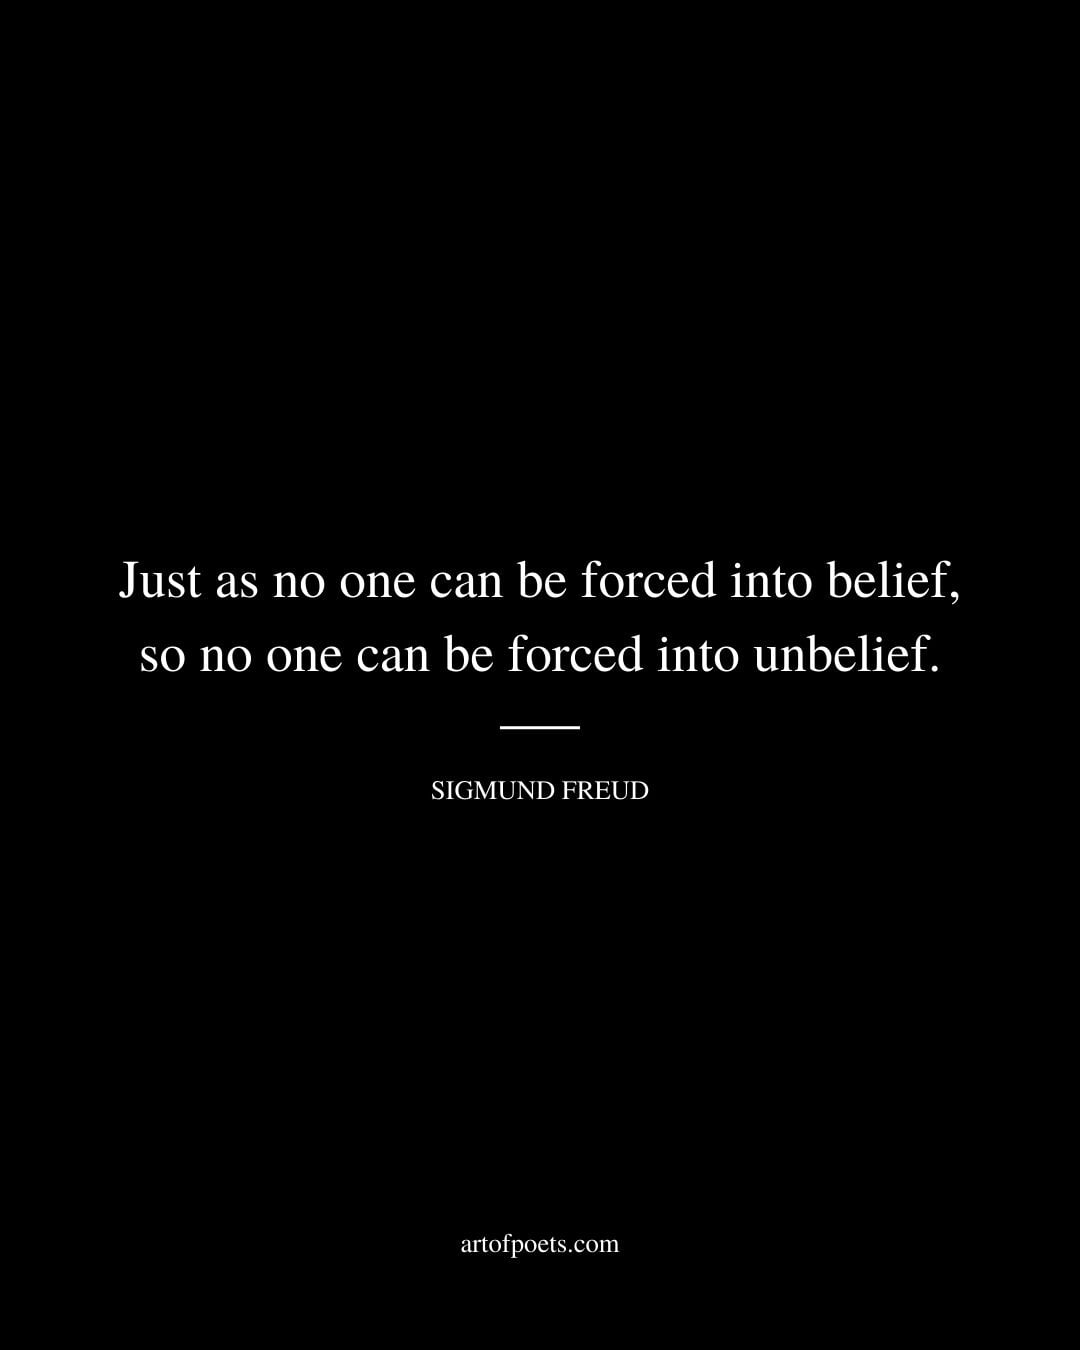 Just as no one can be forced into belief so no one can be forced into unbelief